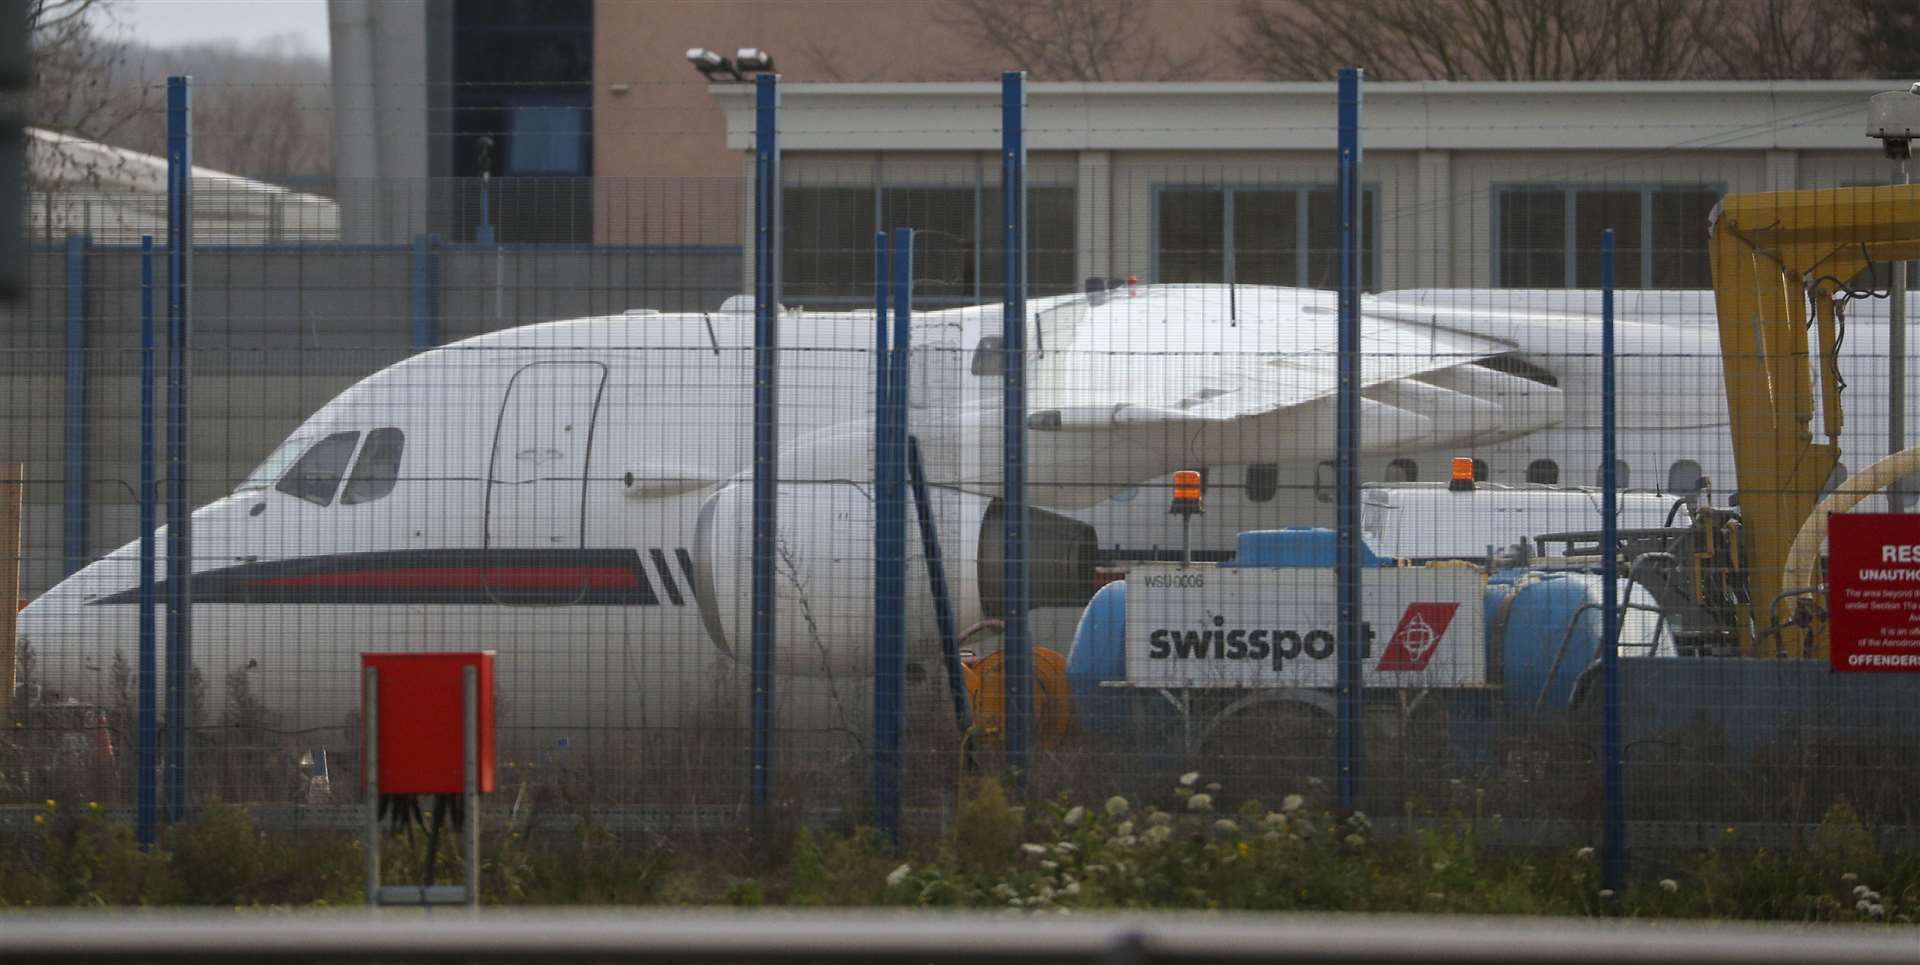 An RAF plane thought to have collected the agreement papers from Brussels sits at London City Airport (Steve Parsons/PA)